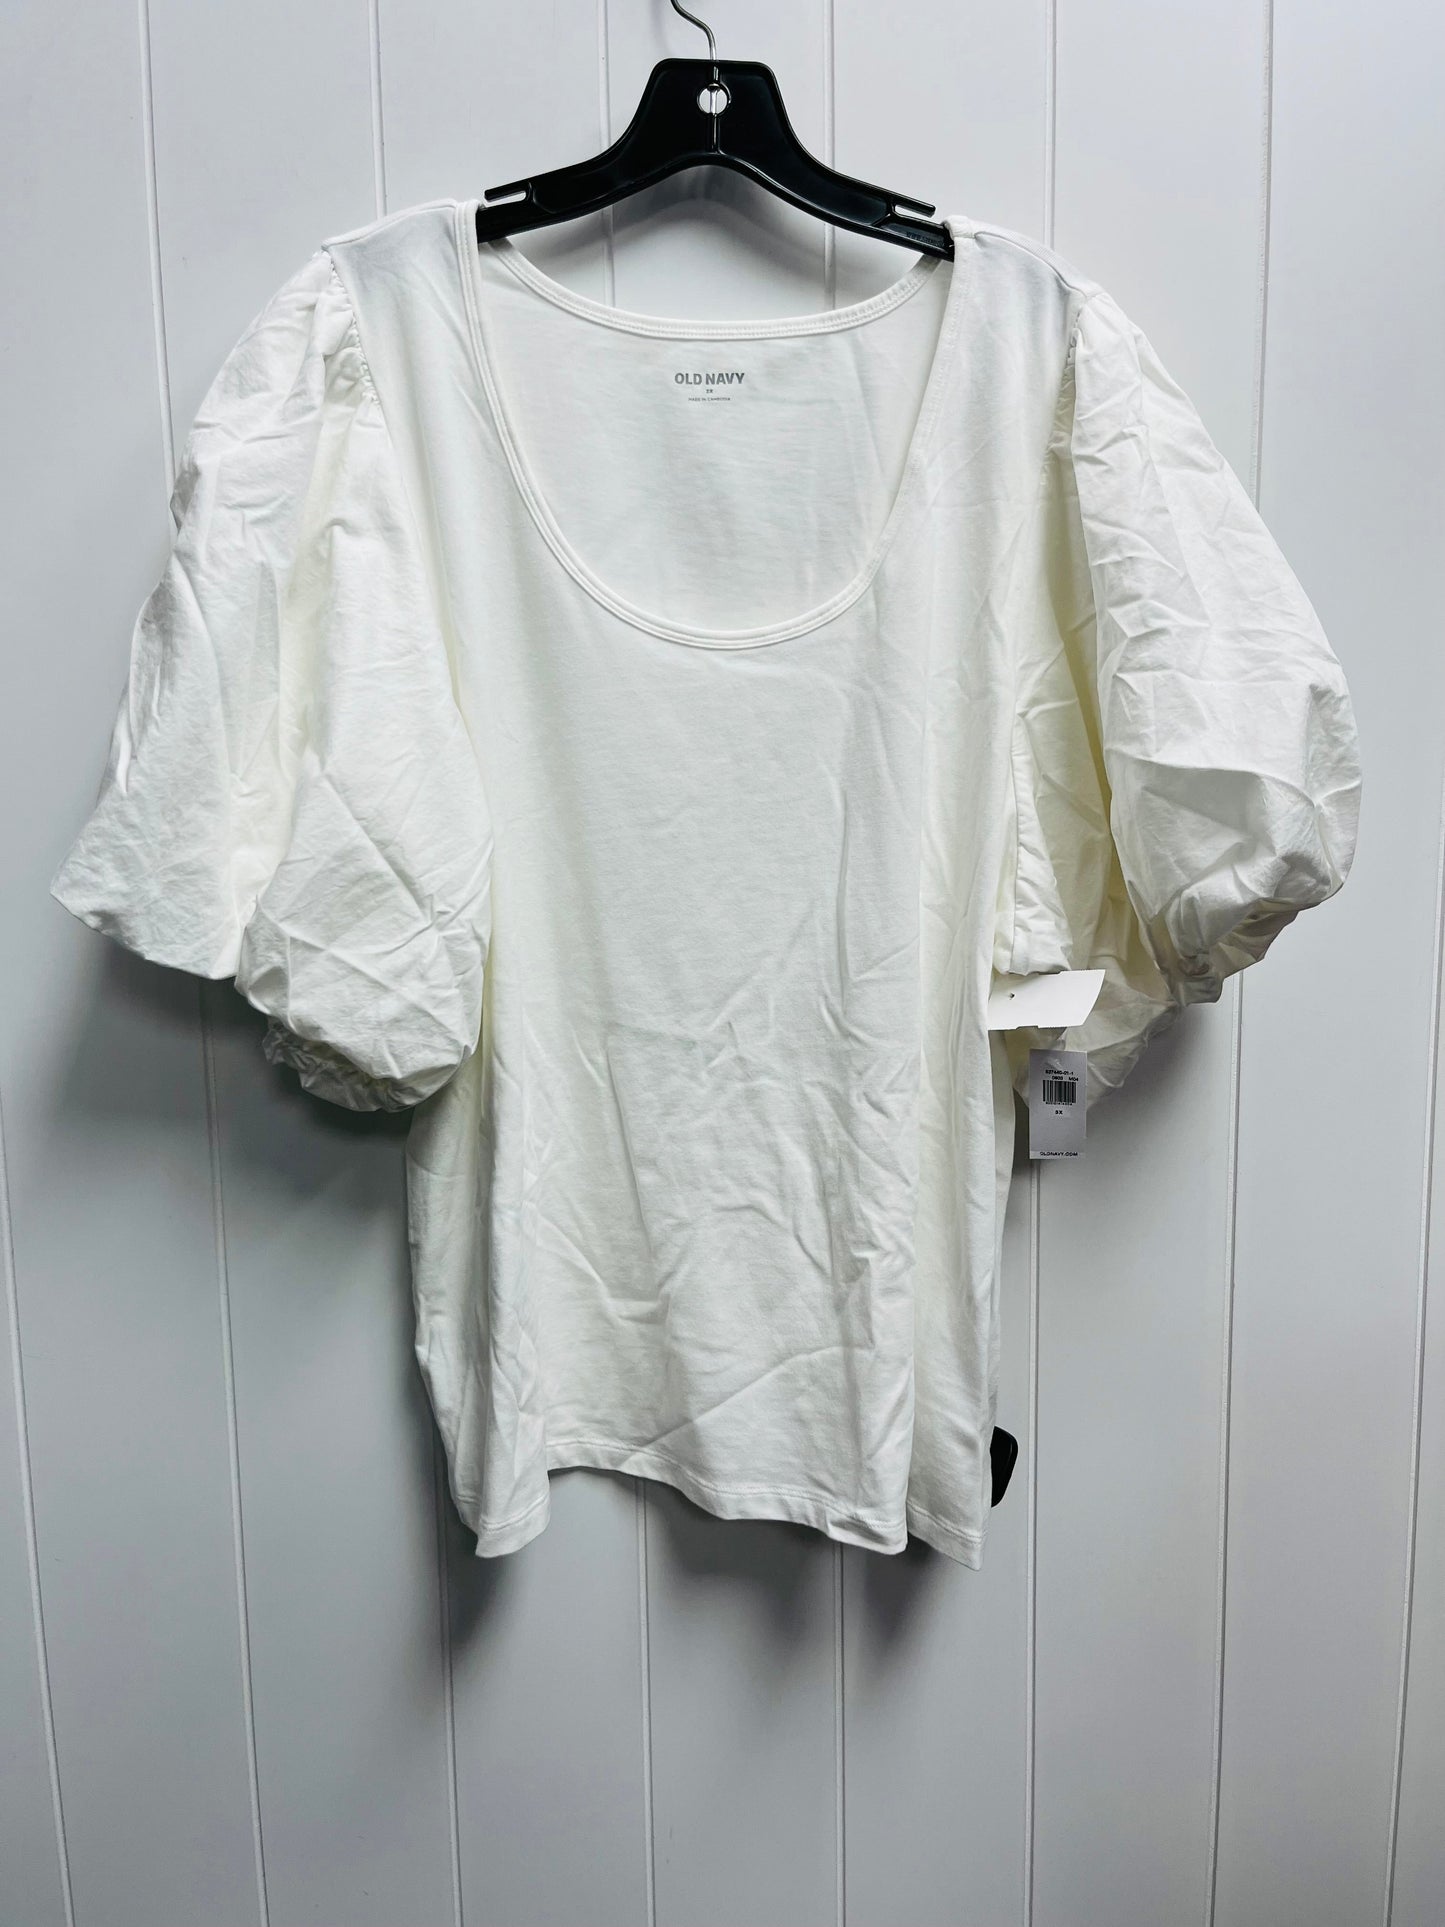 Top Short Sleeve By Old Navy  Size: 3x